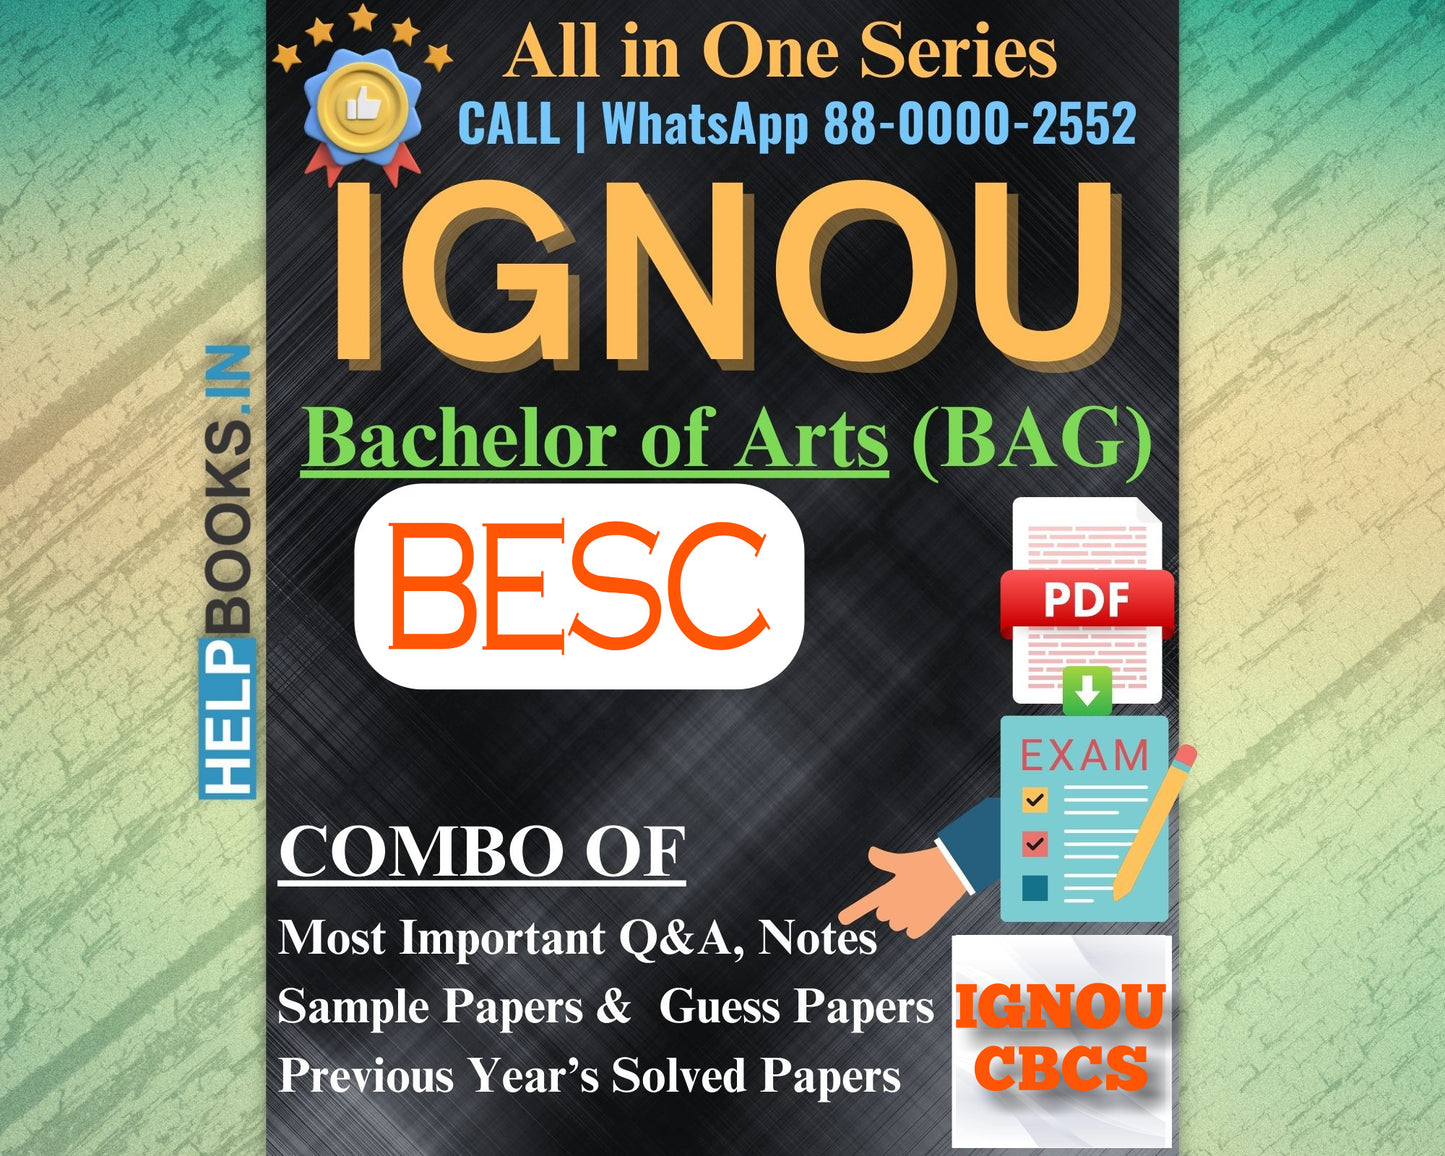 IGNOU BAG Online Study Package: Bachelor of Arts (BA) - Previous Year’s Solved Papers, Q&A, Exam Notes, Sample Papers, Guess Papers-BESC131, BESC132, BESC133, BESC134